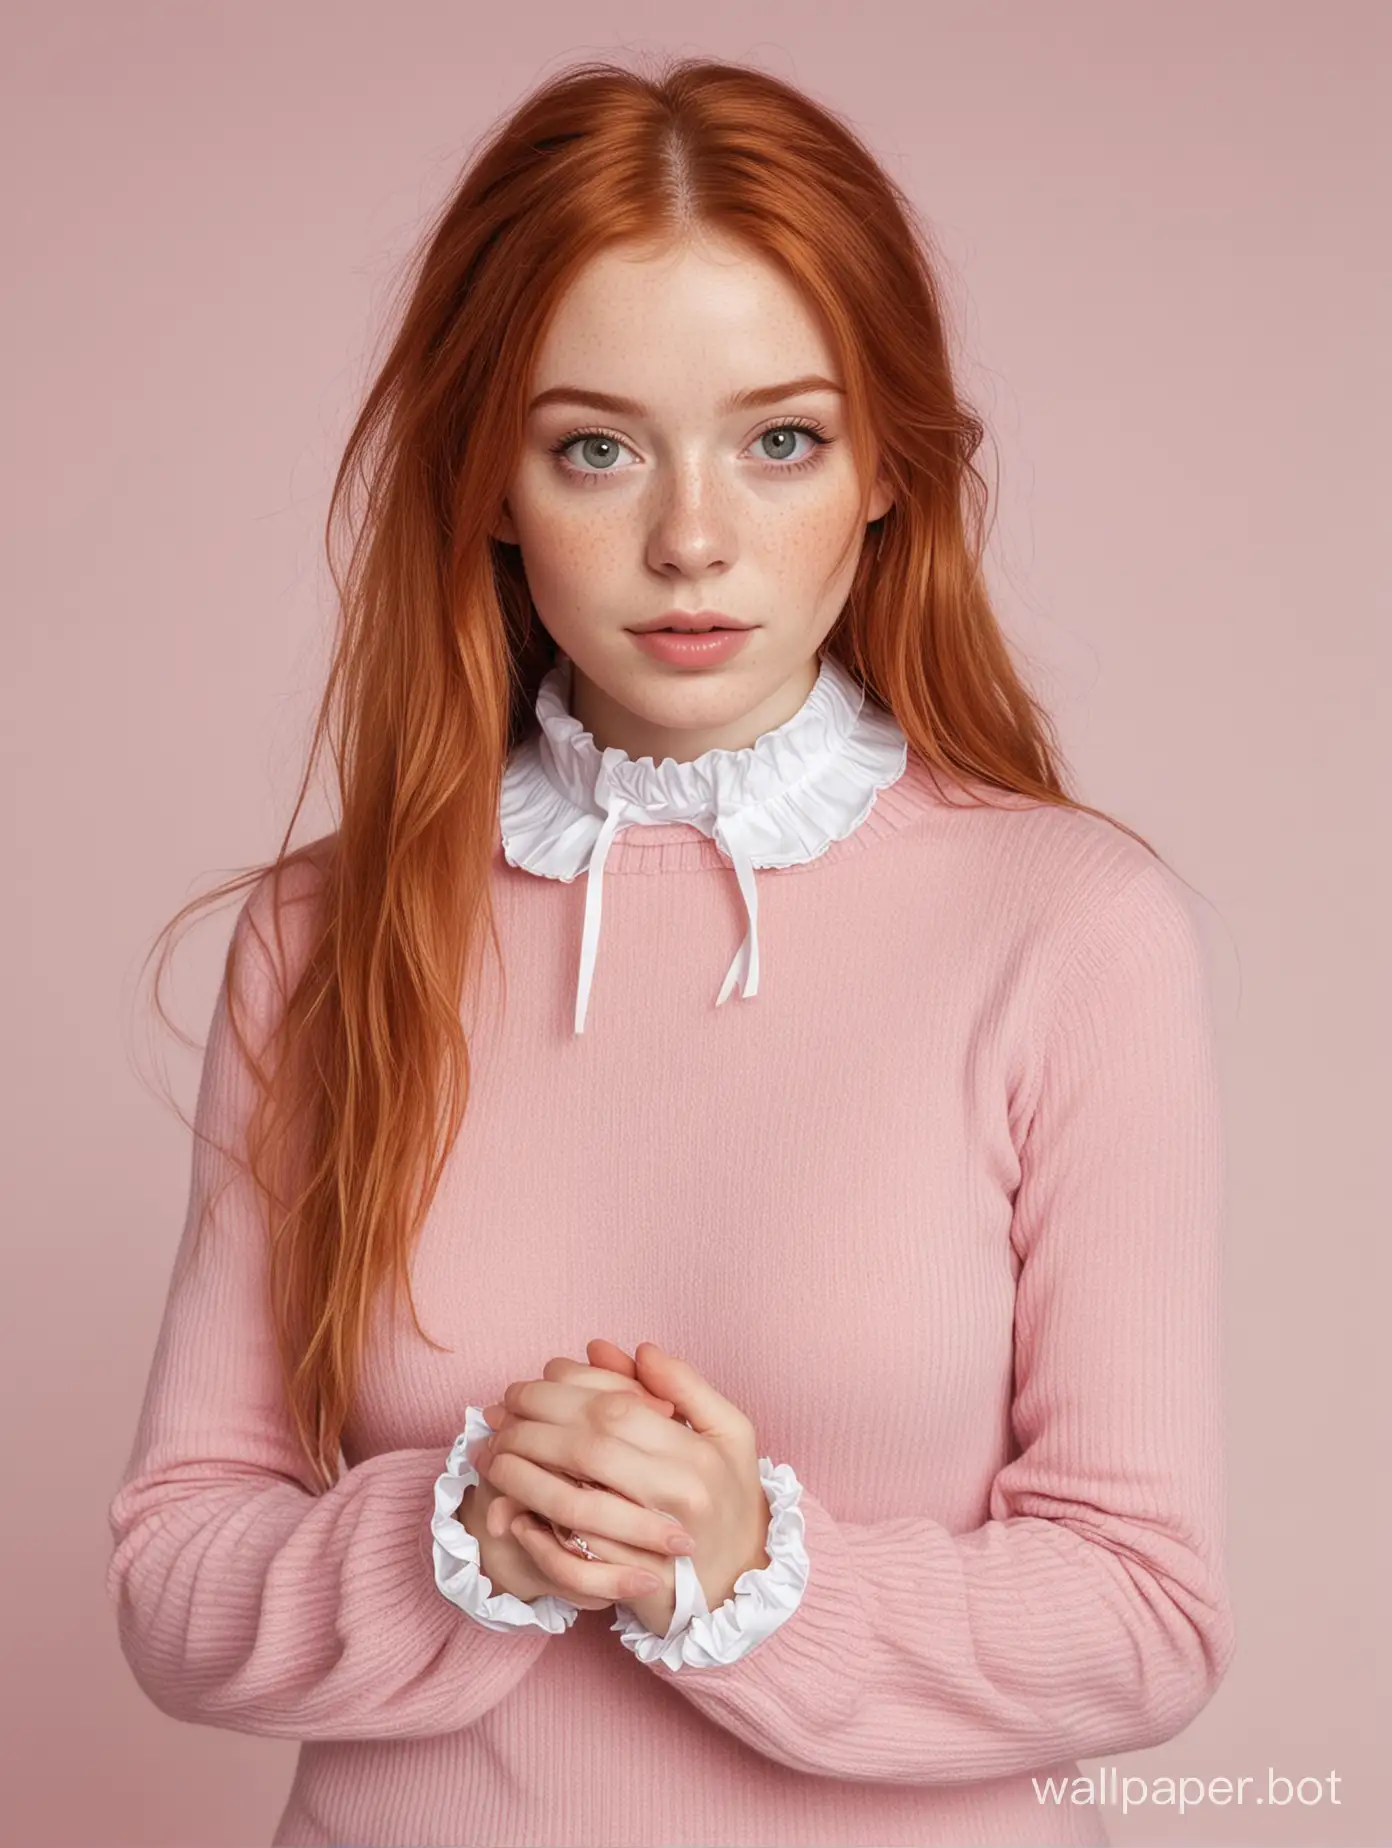 Adorable-Girl-with-Ginger-Hair-and-Freckles-in-Pink-Dress-and-Sweater